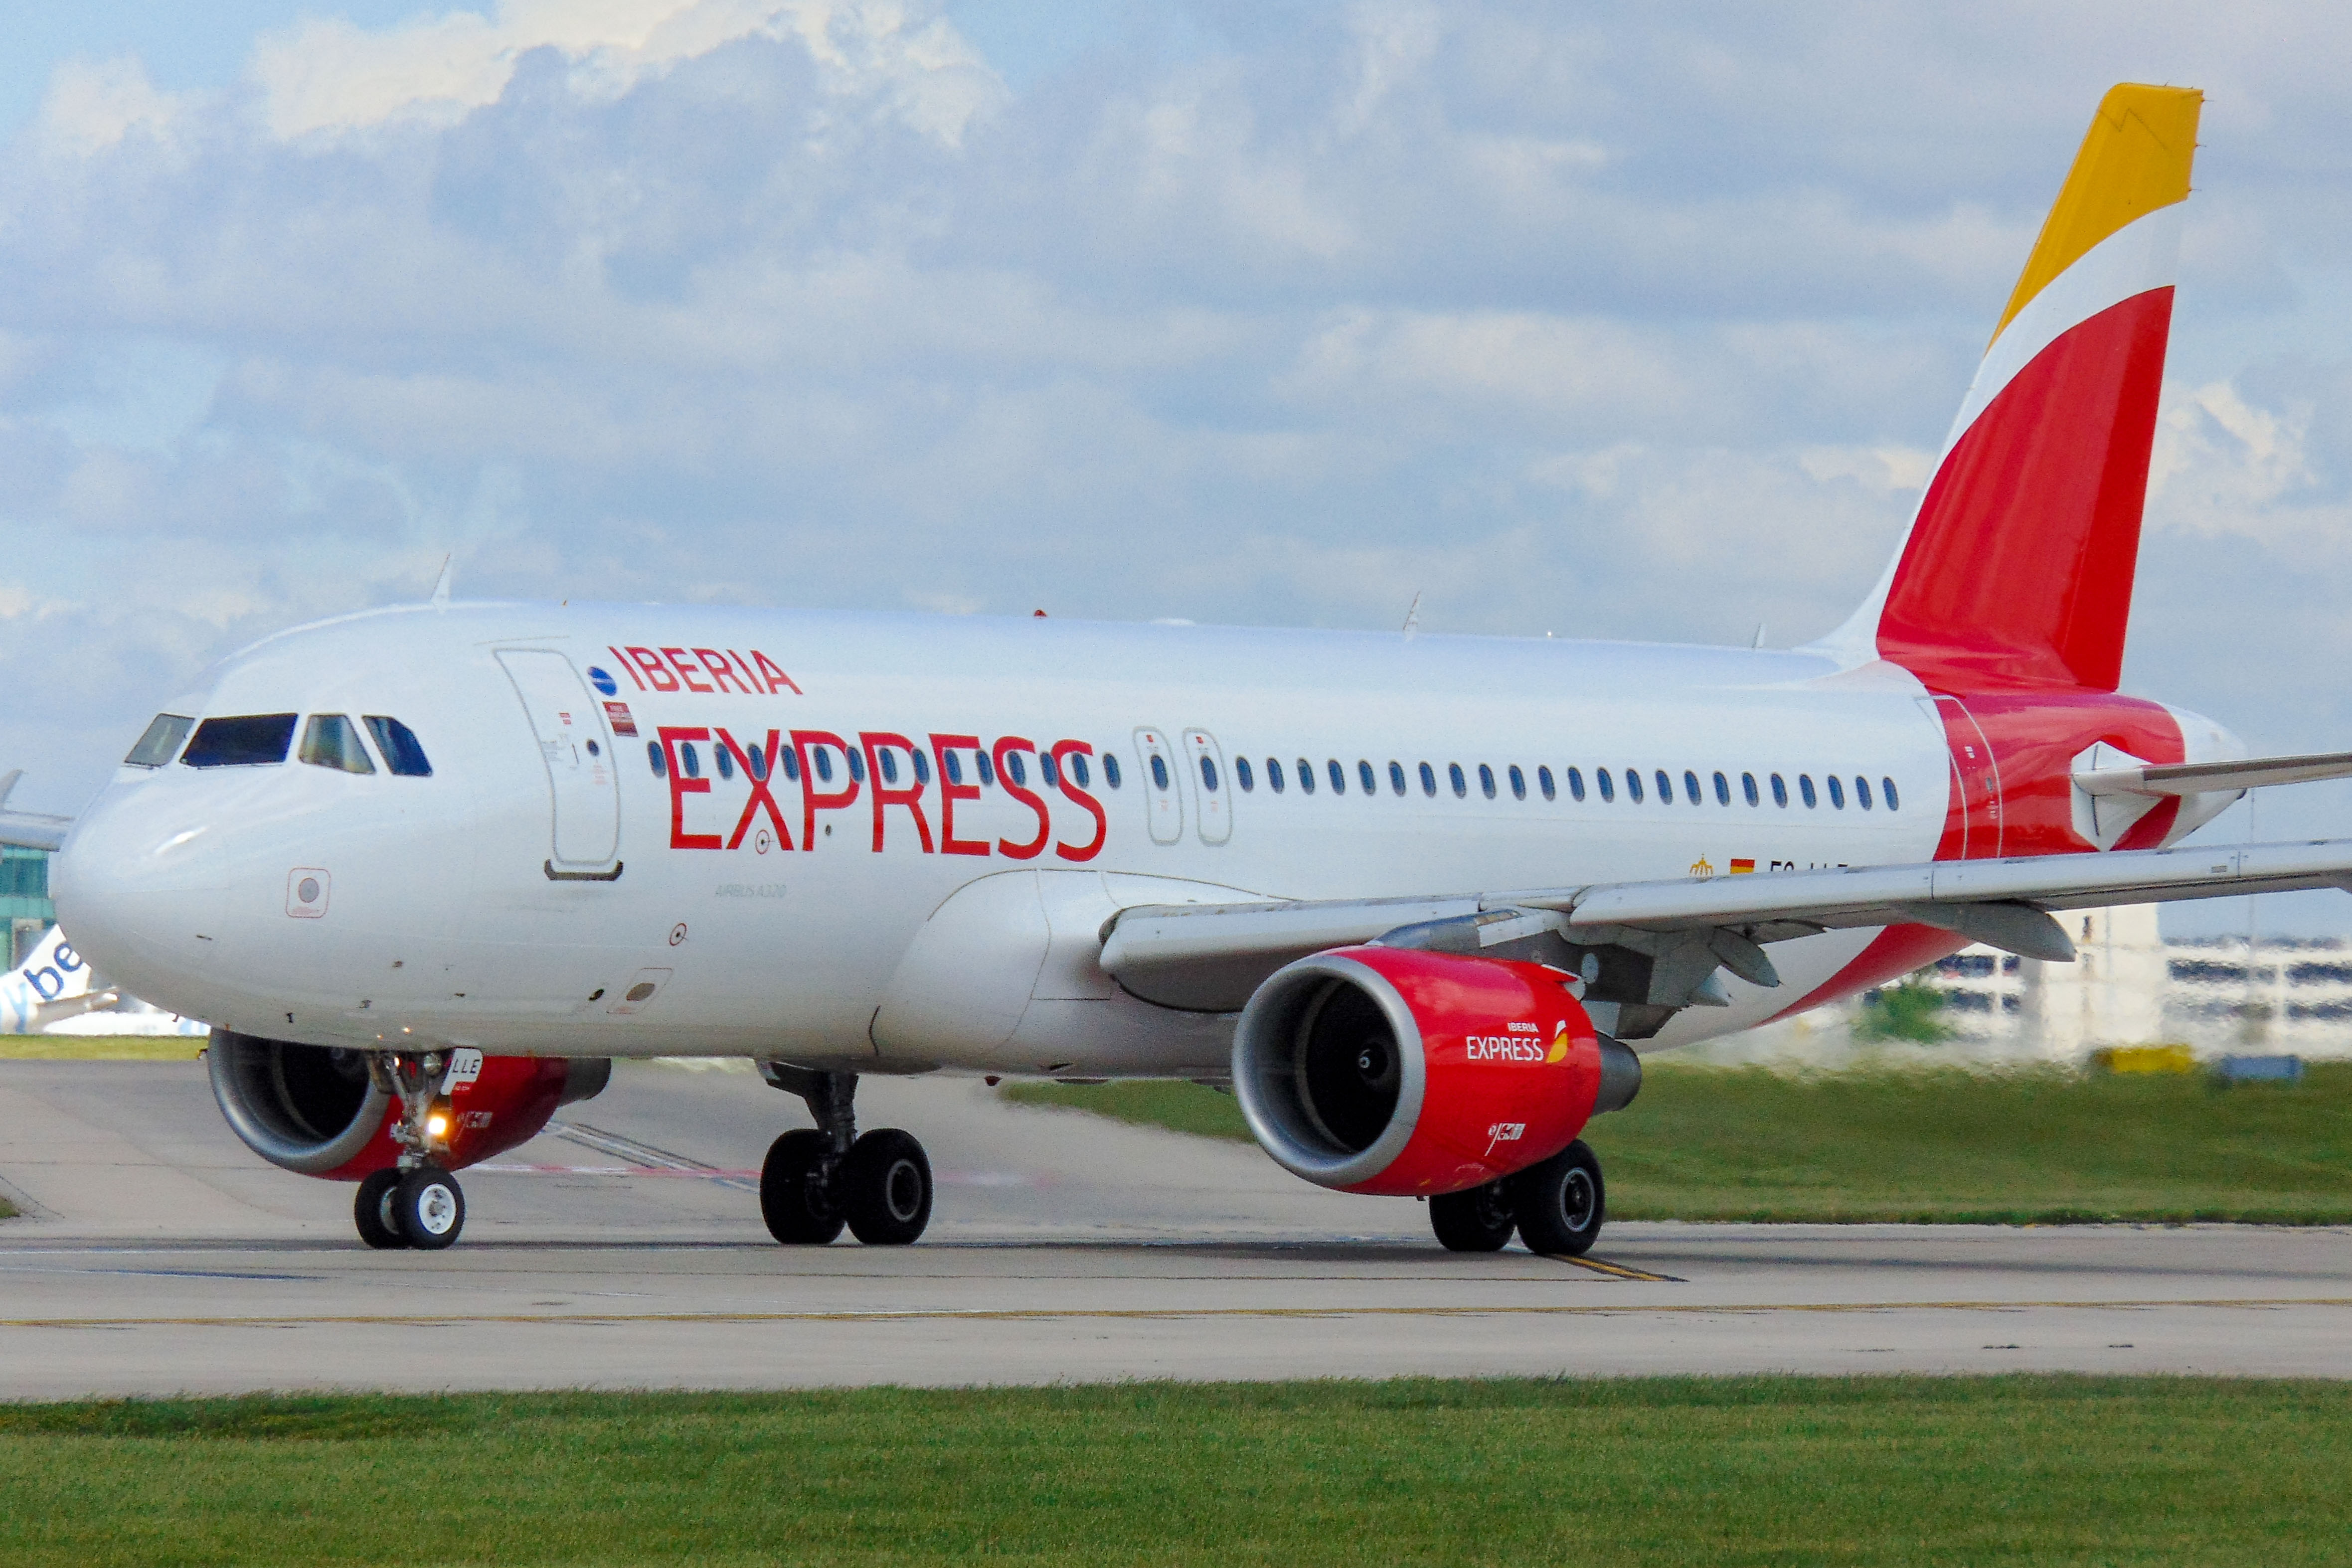 EC-LLE/ECLLE Iberia Express Airbus A320 Airframe Information - AVSpotters.com